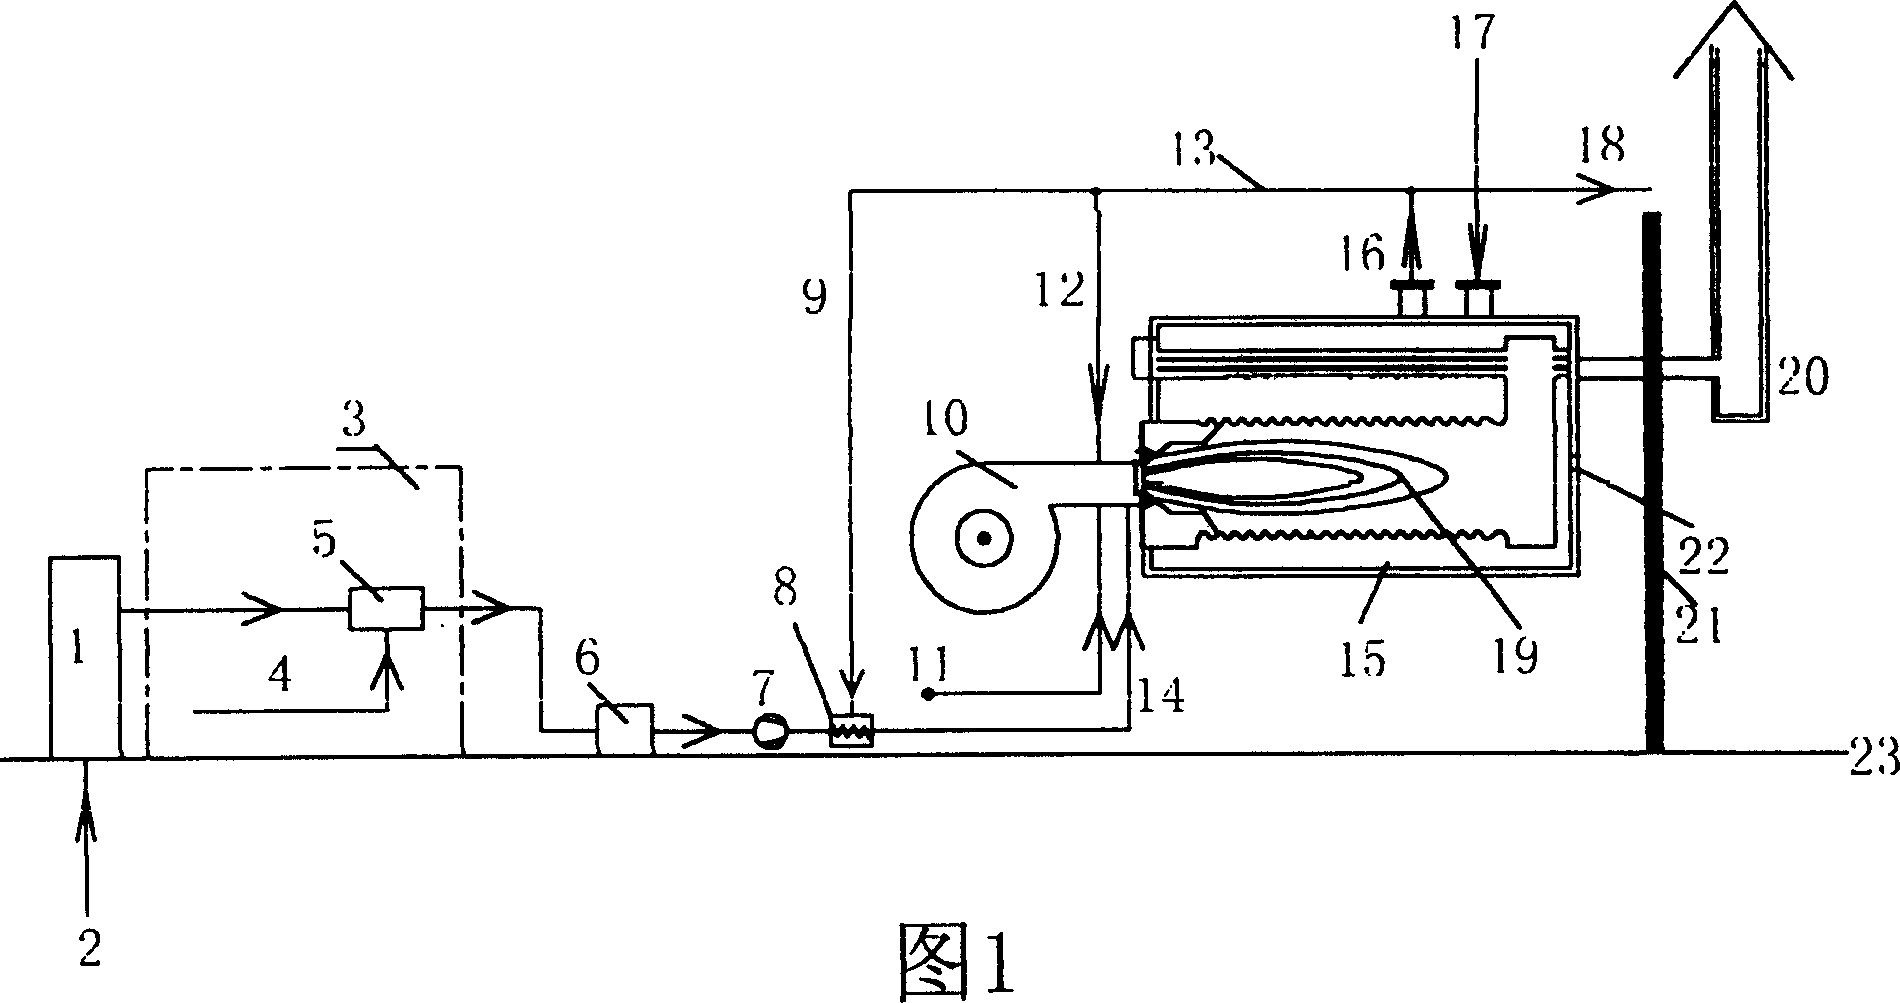 Burning ultra-thick oil by method of rotating cup atomization